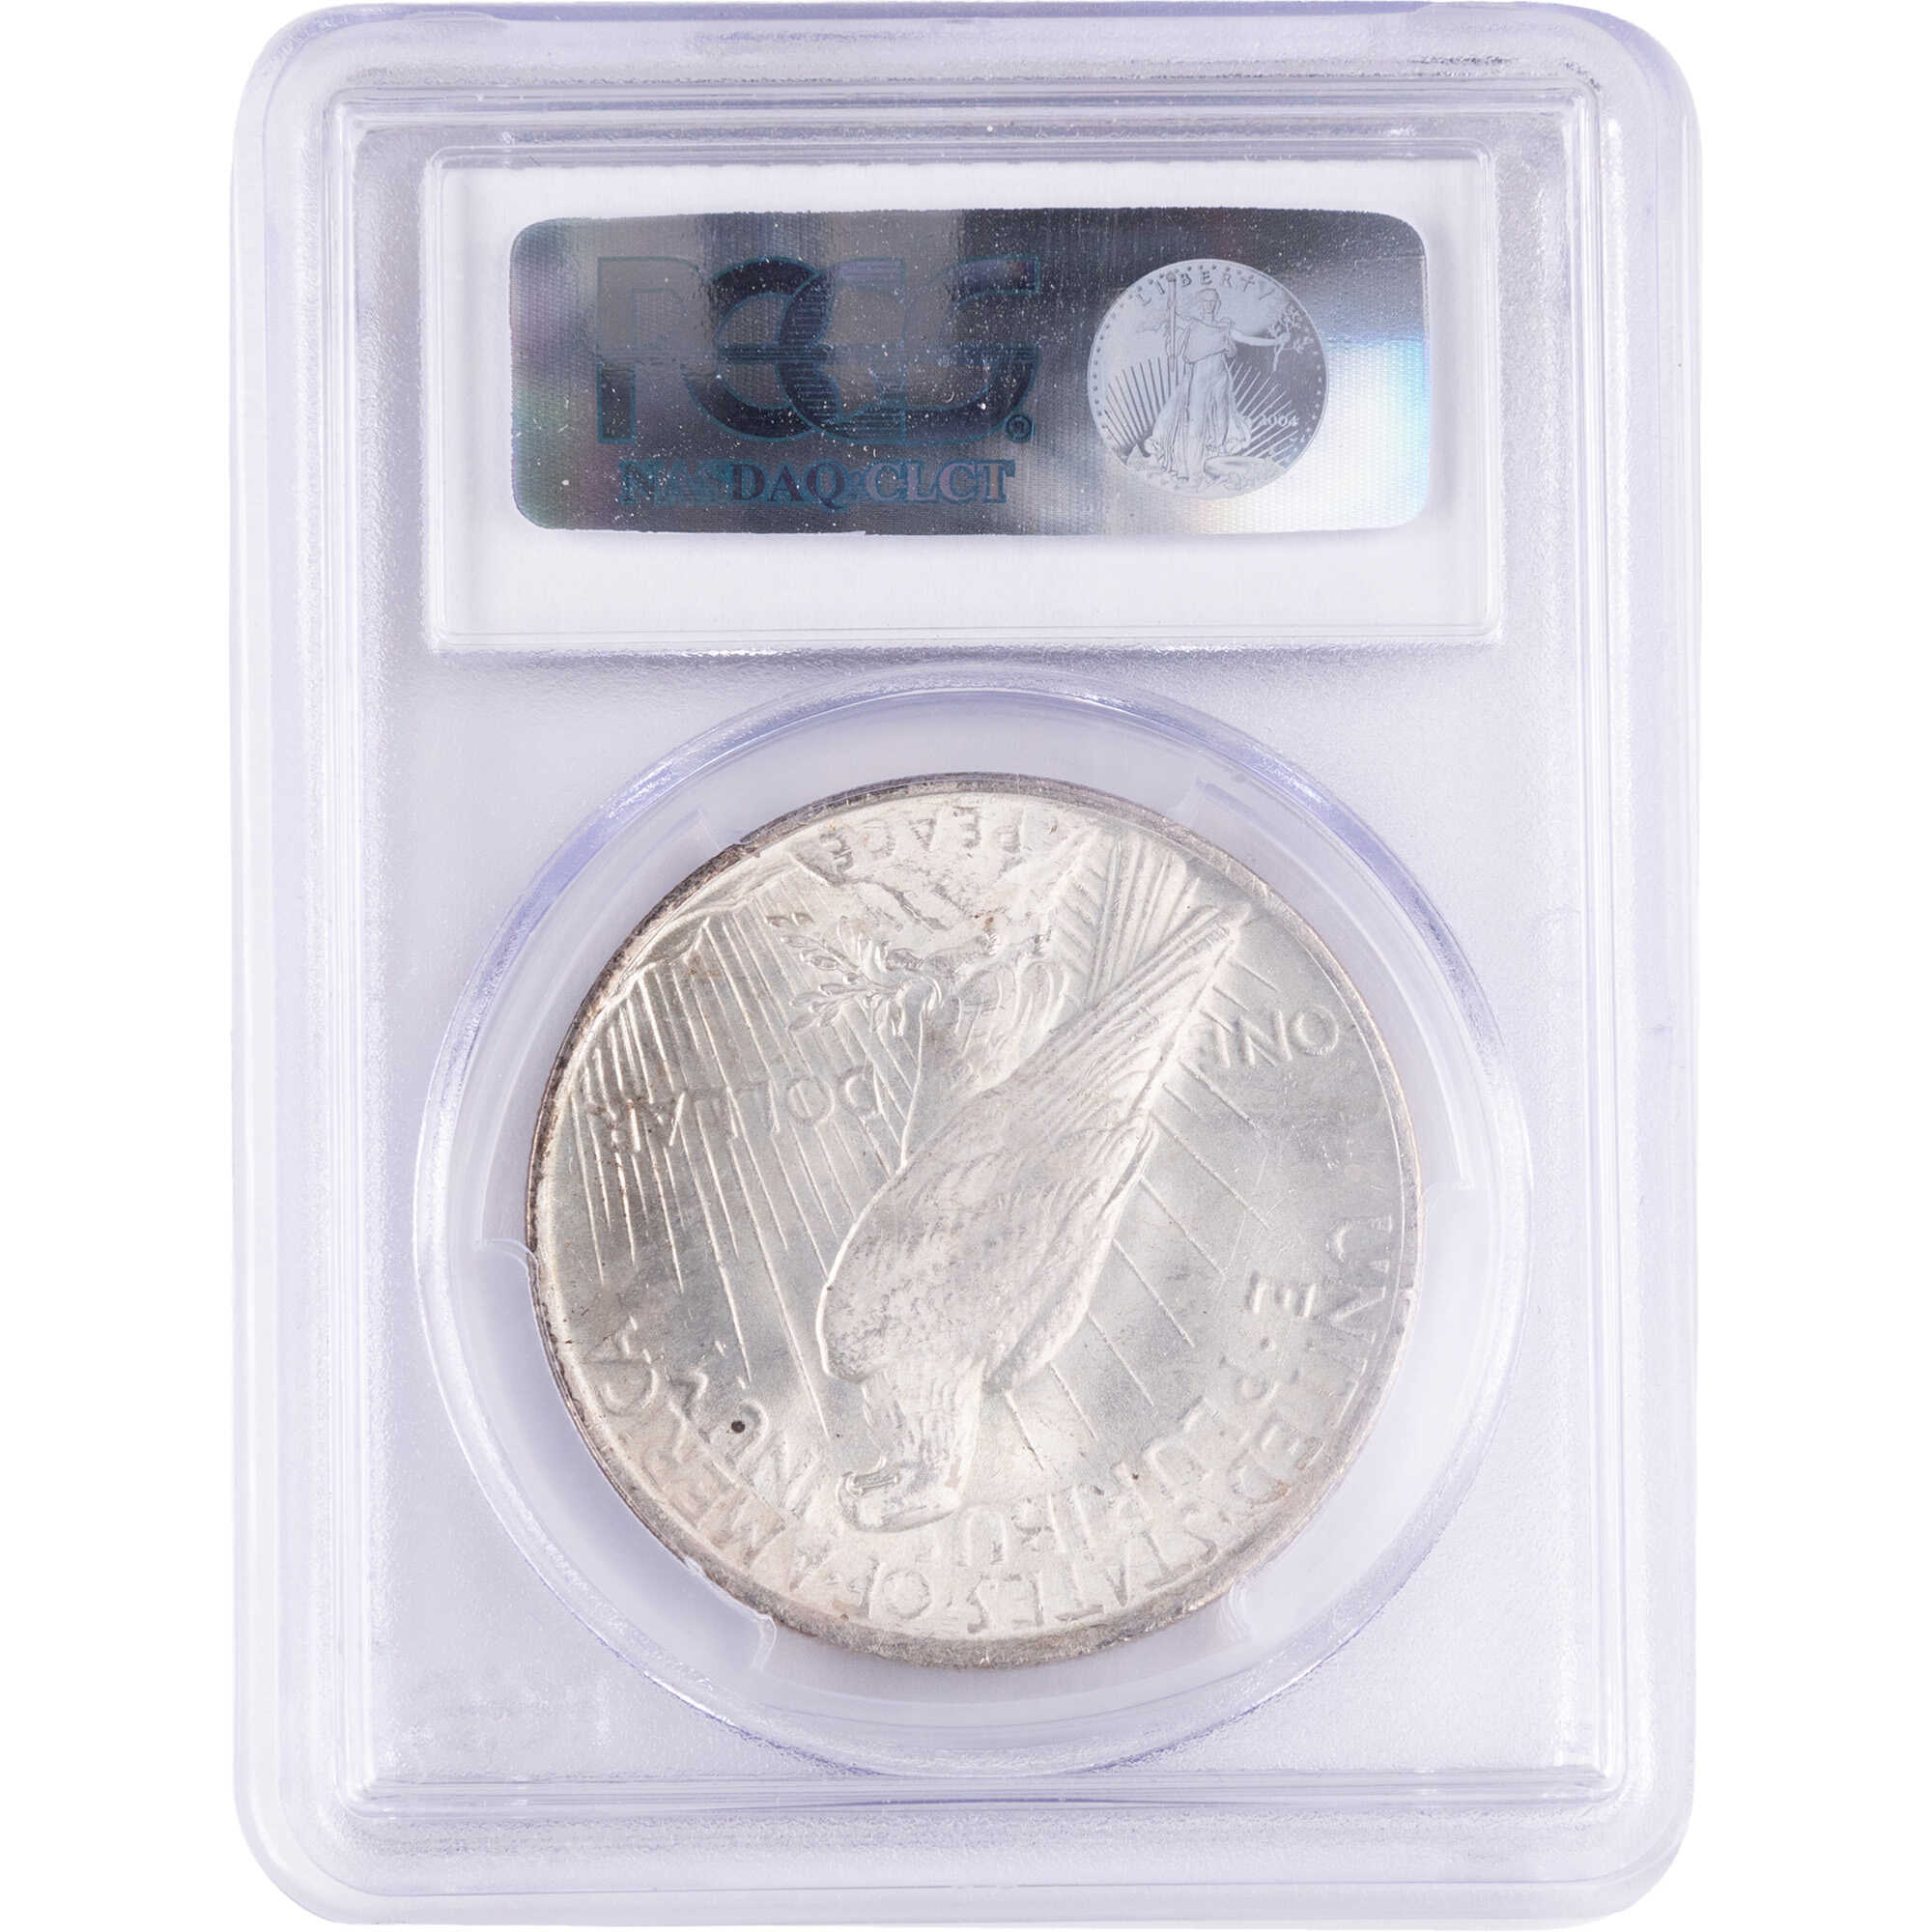 1923 Peace Dollar MS 63 PCGS Silver $1 Uncirculated Coin SKU:CPC12851